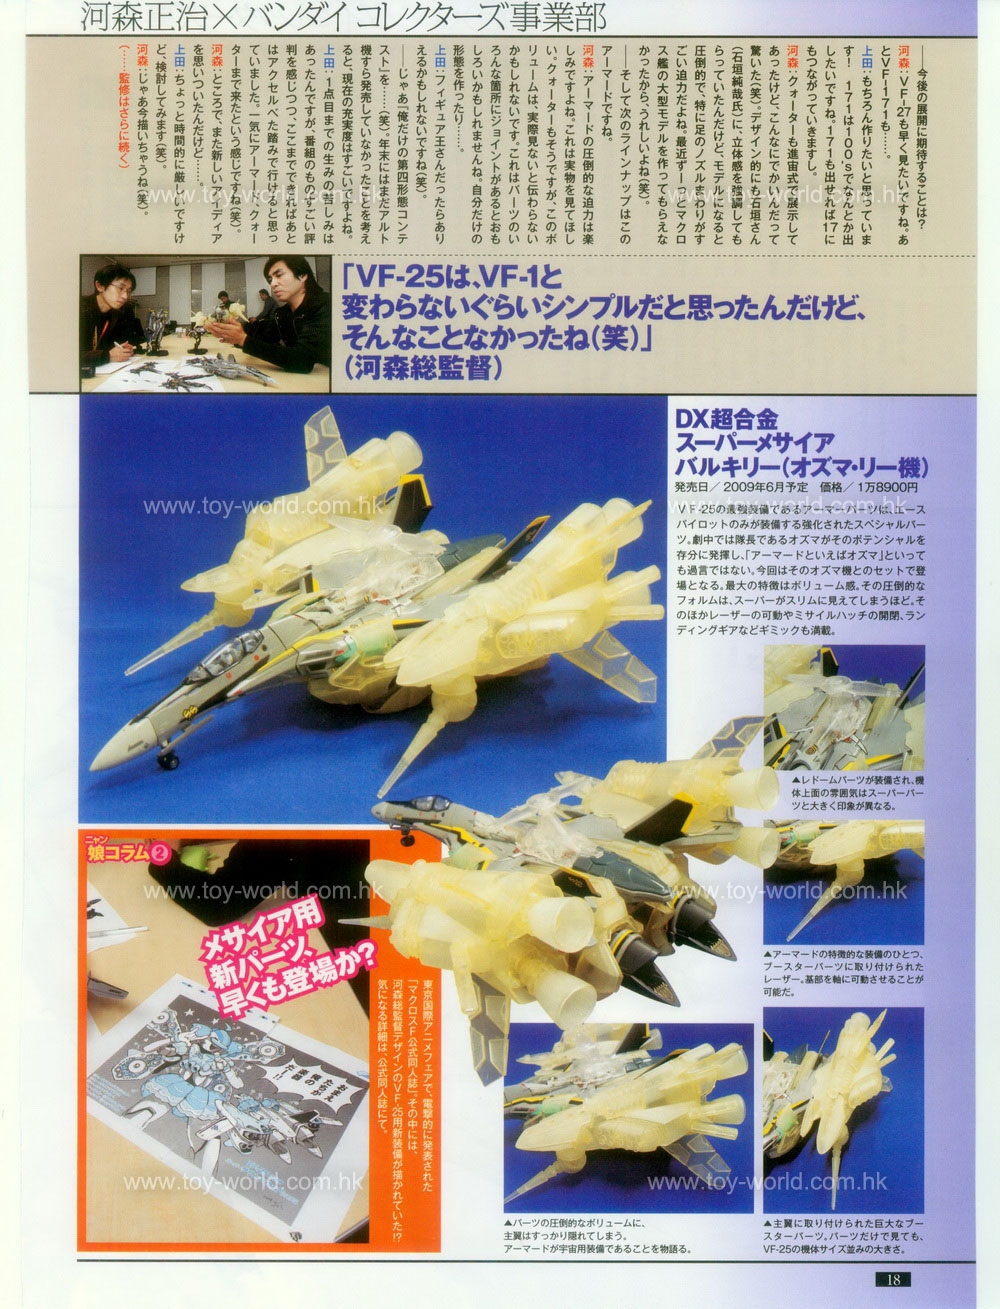 Figure OH No.134 - Special Feature: MACROSS Products 16